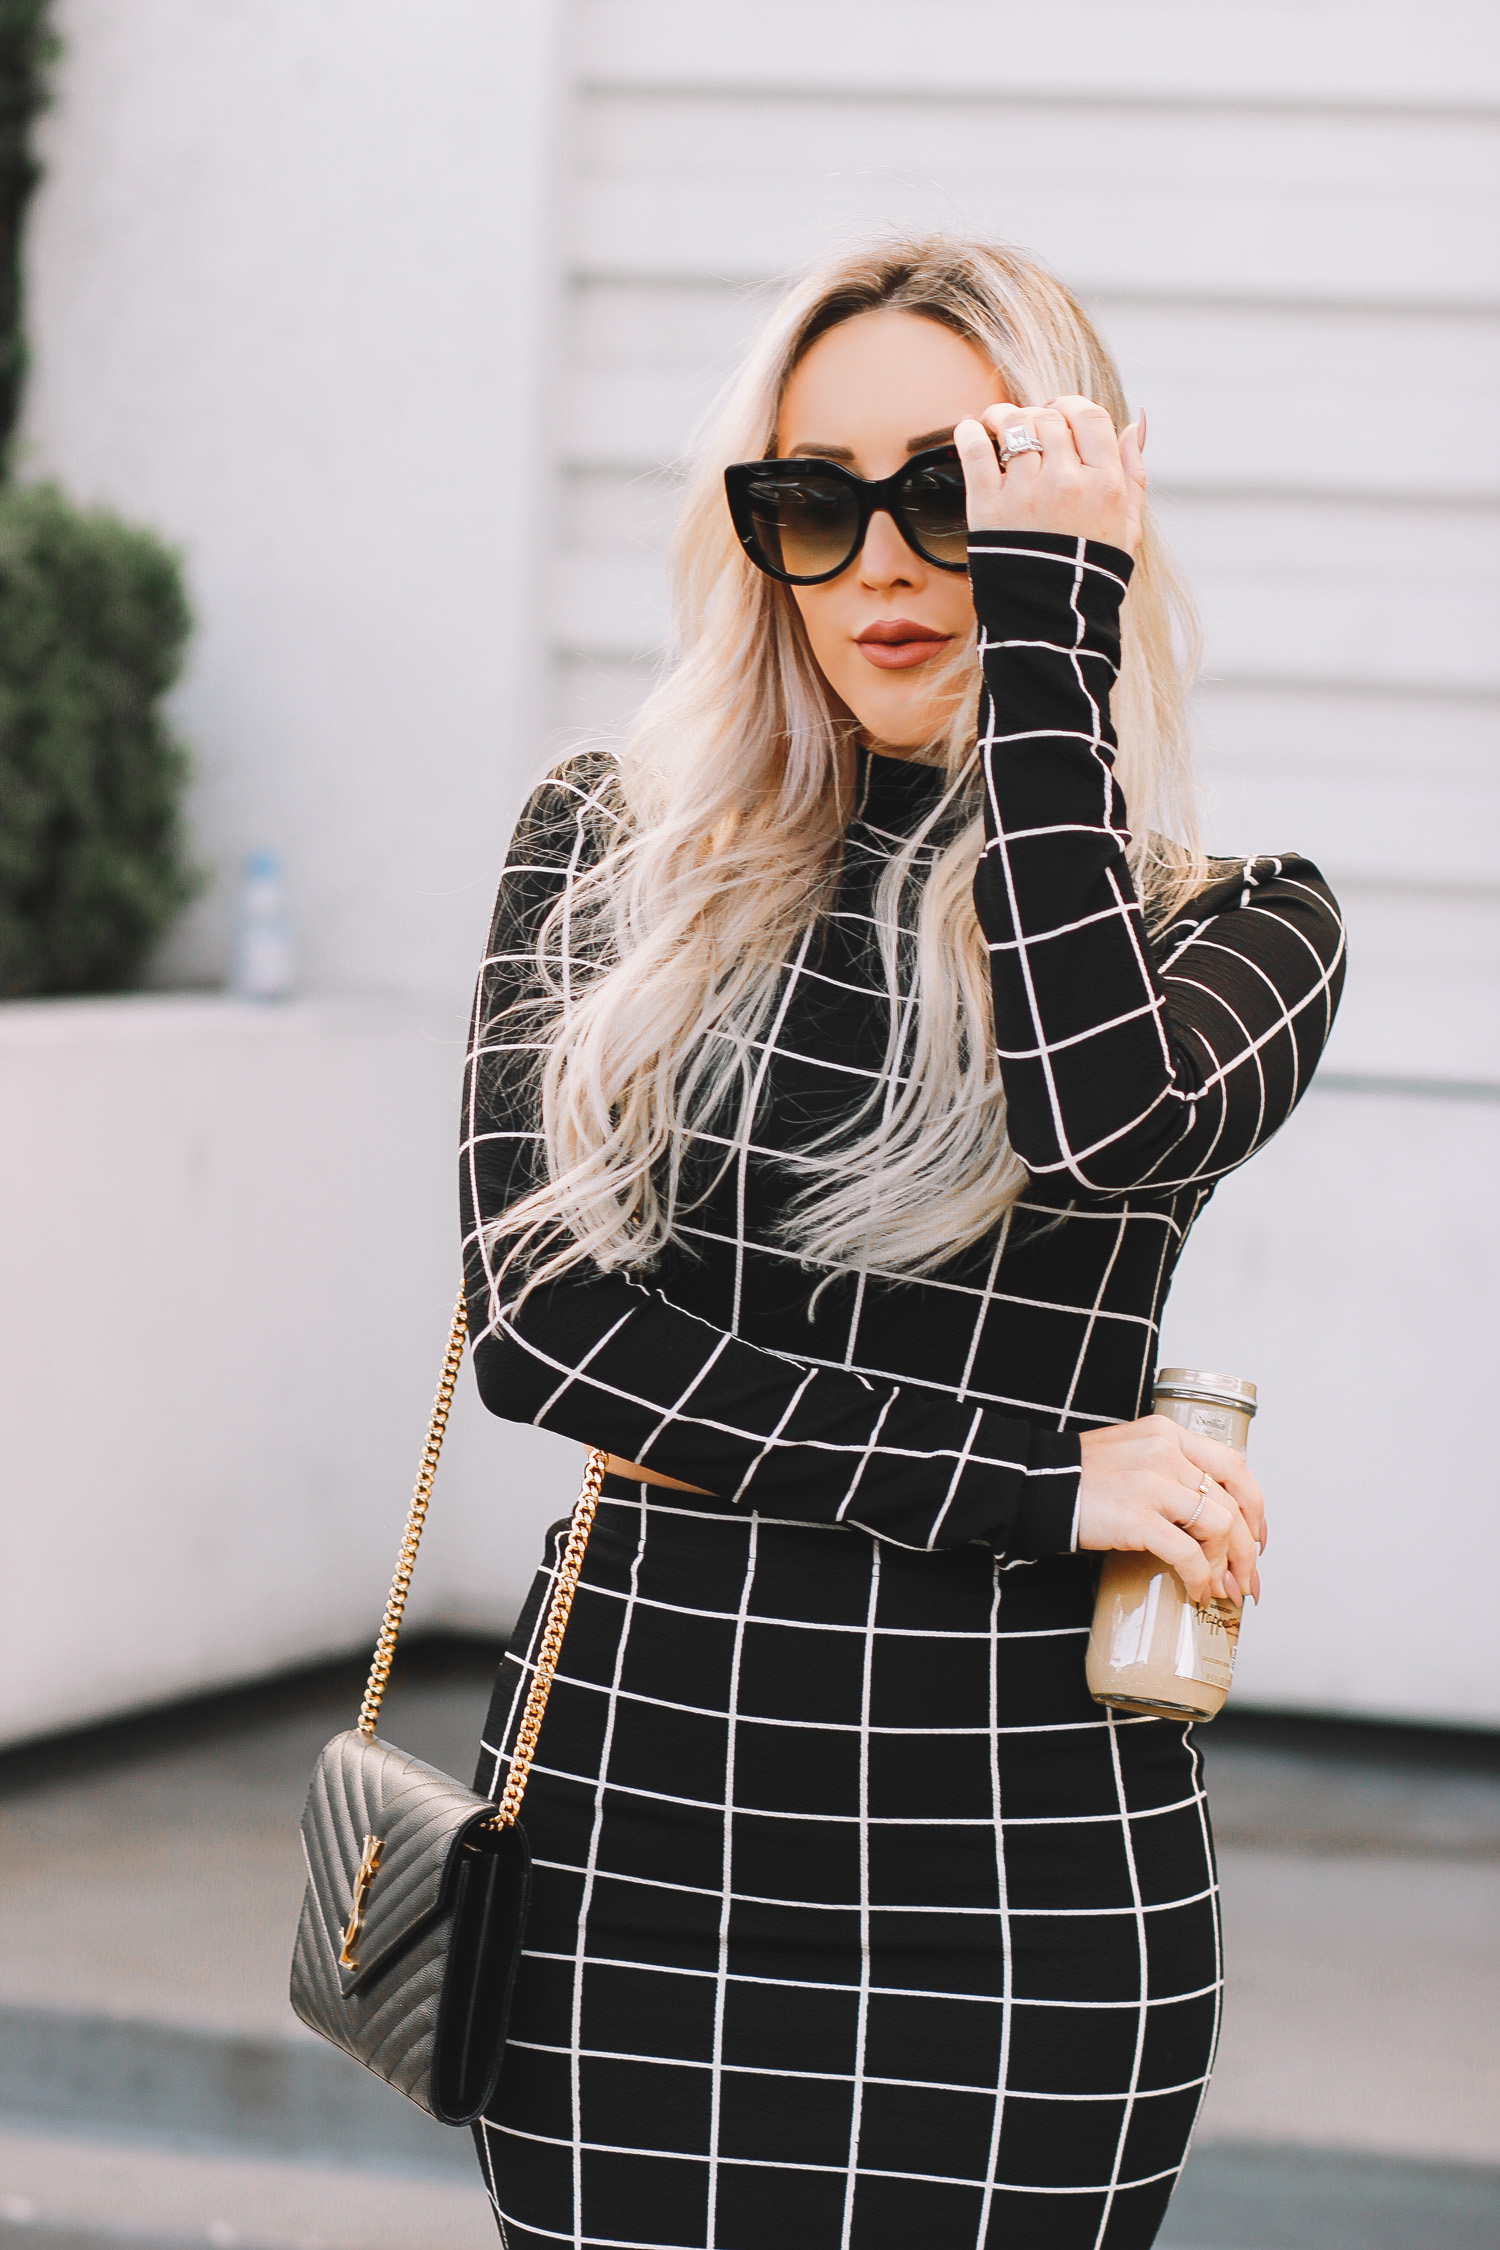 Grid Print Two Piece Business Style | Black YSL Bag | Nude Louboutins | Blondie in the City by Hayley Larue